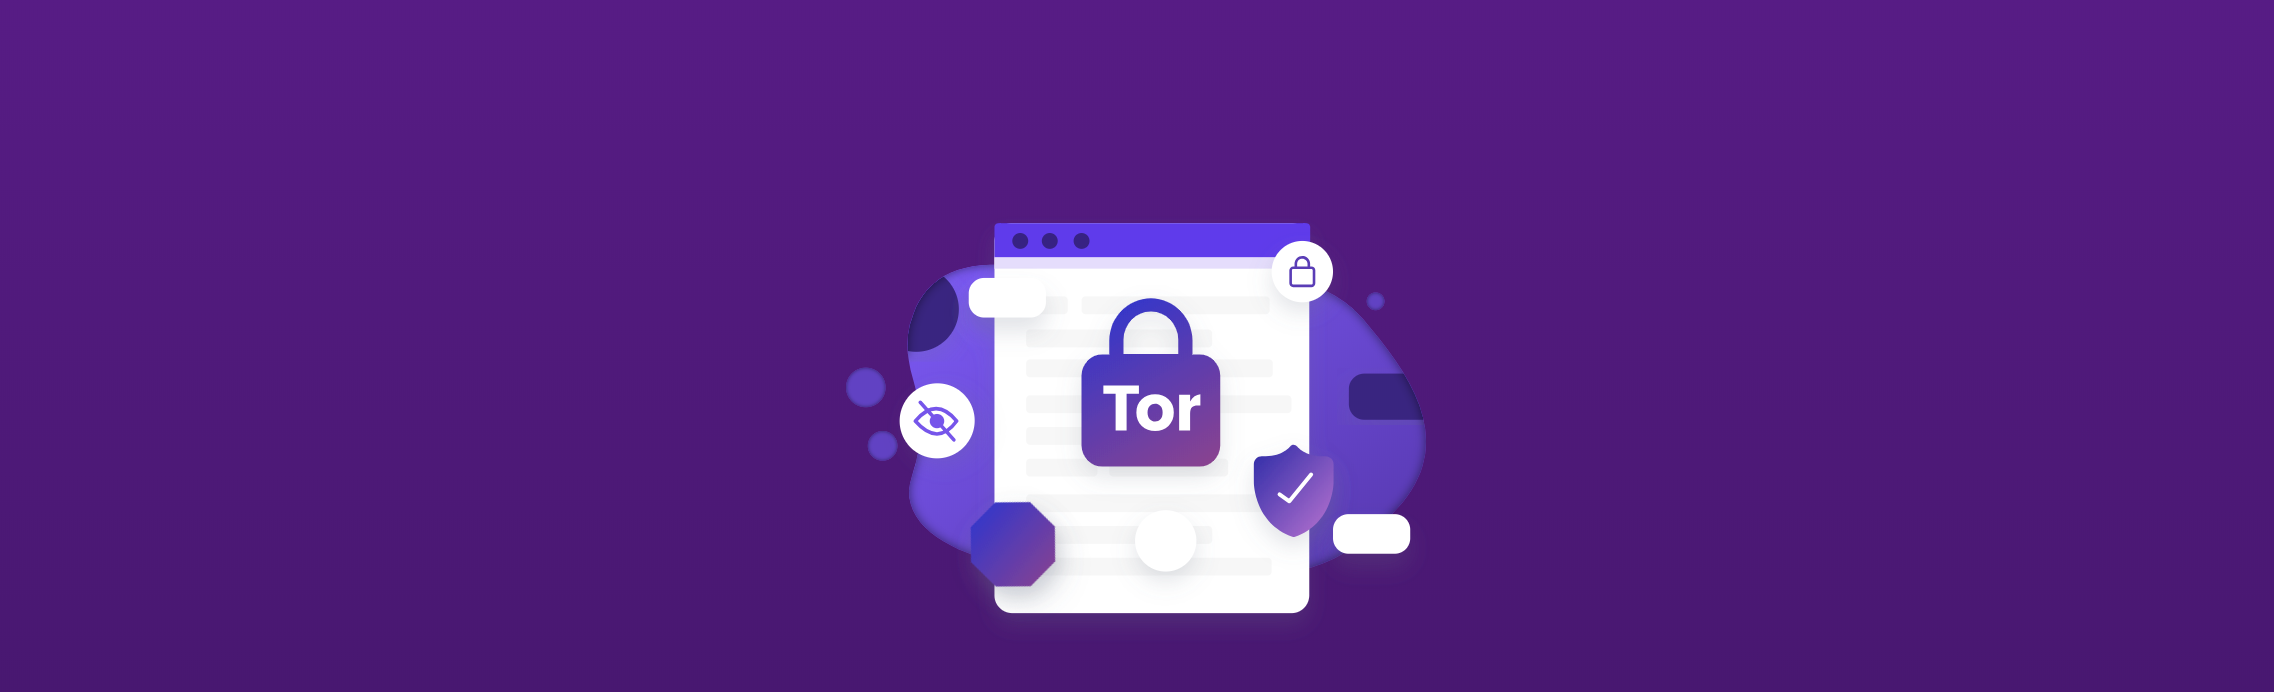 tor browser anonymous browsing gydra